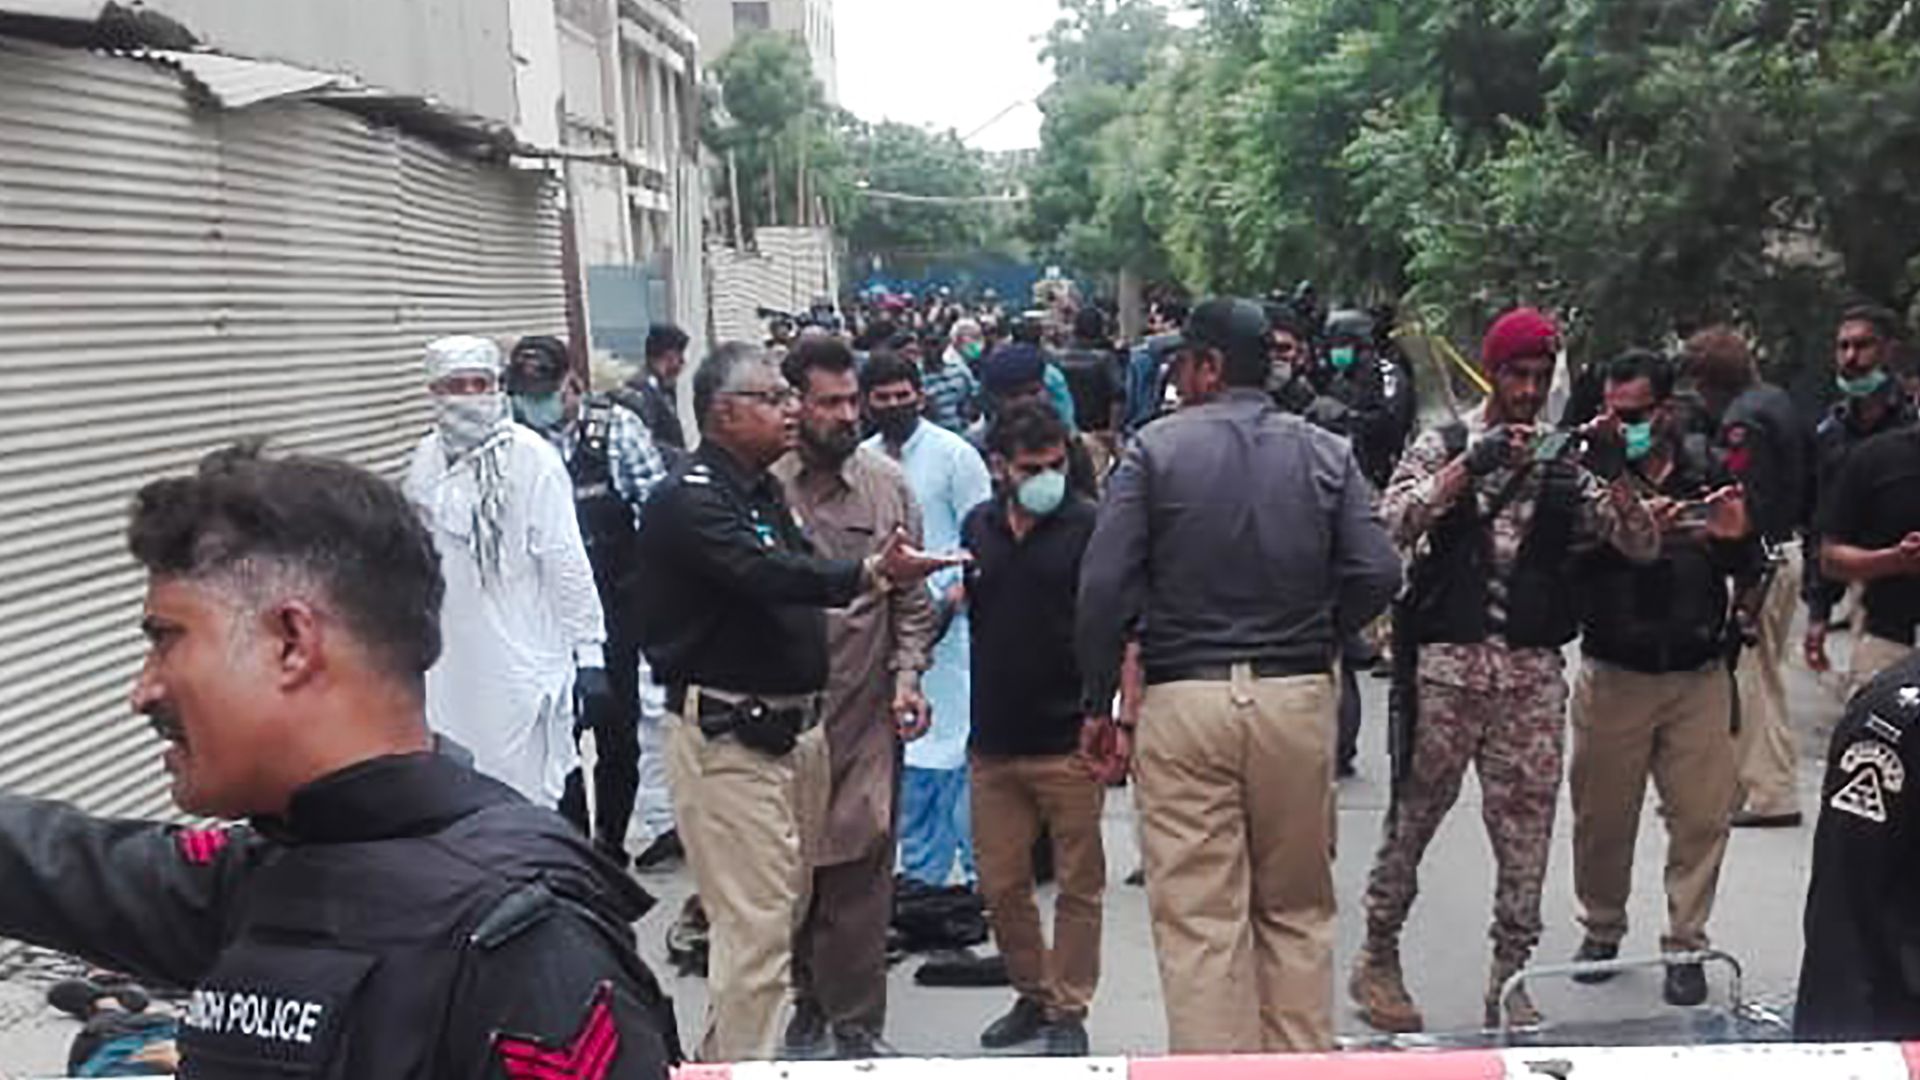 Policemen secure an area around a body outside the Pakistan Stock Exchange building after a group of gunmen attacked the building in Karachi on June 29